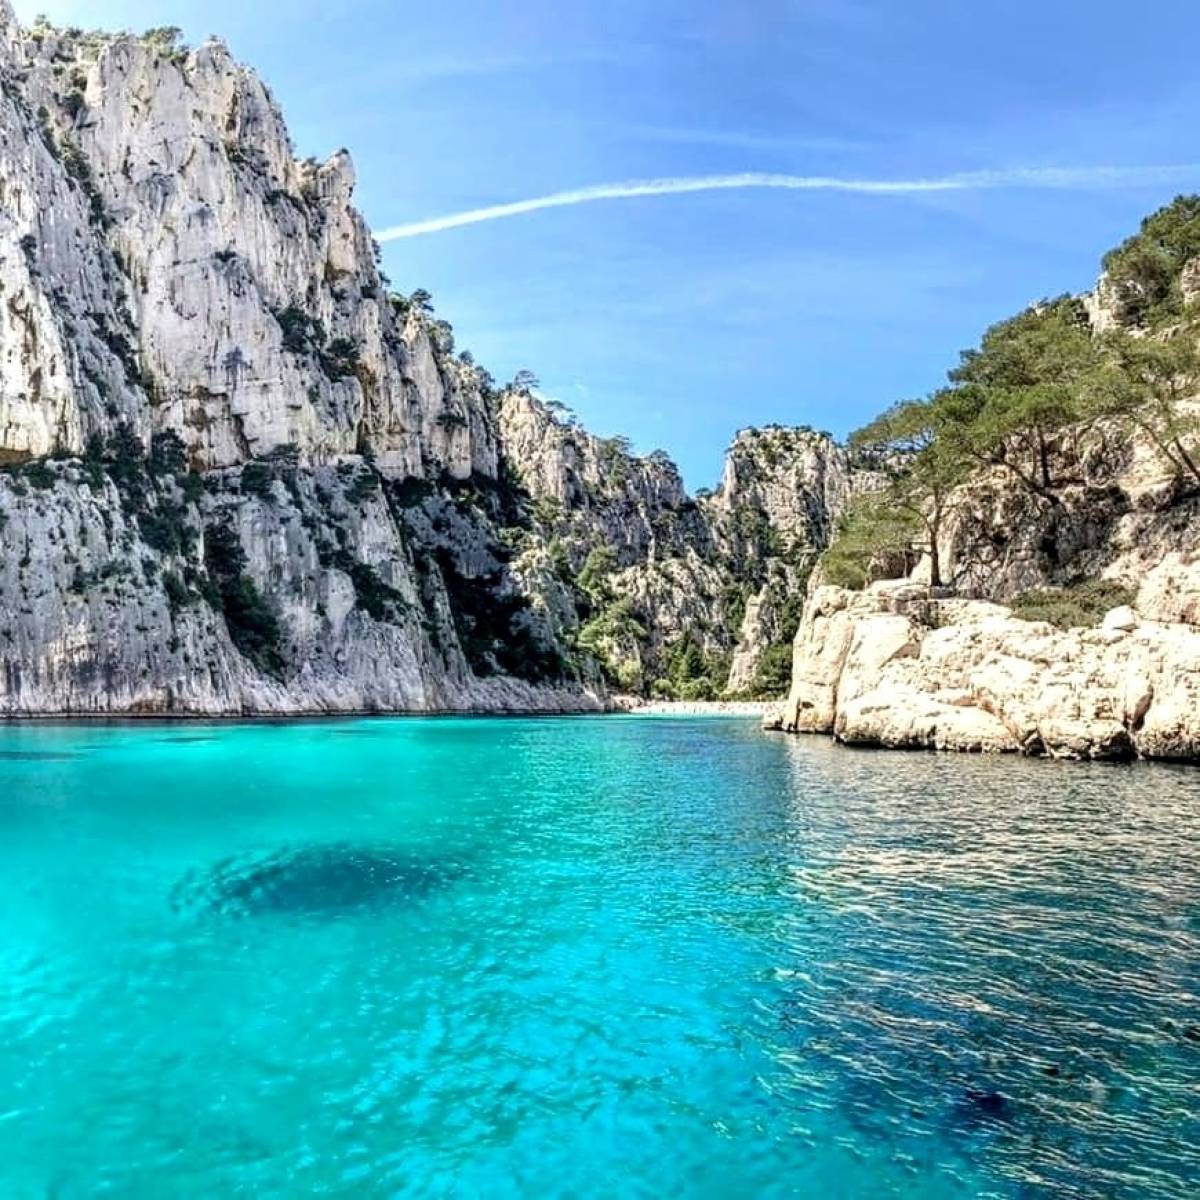 Sail to the incredible Calanque d'En-Vau with L'Eden Boat: a breathtaking view awaits you